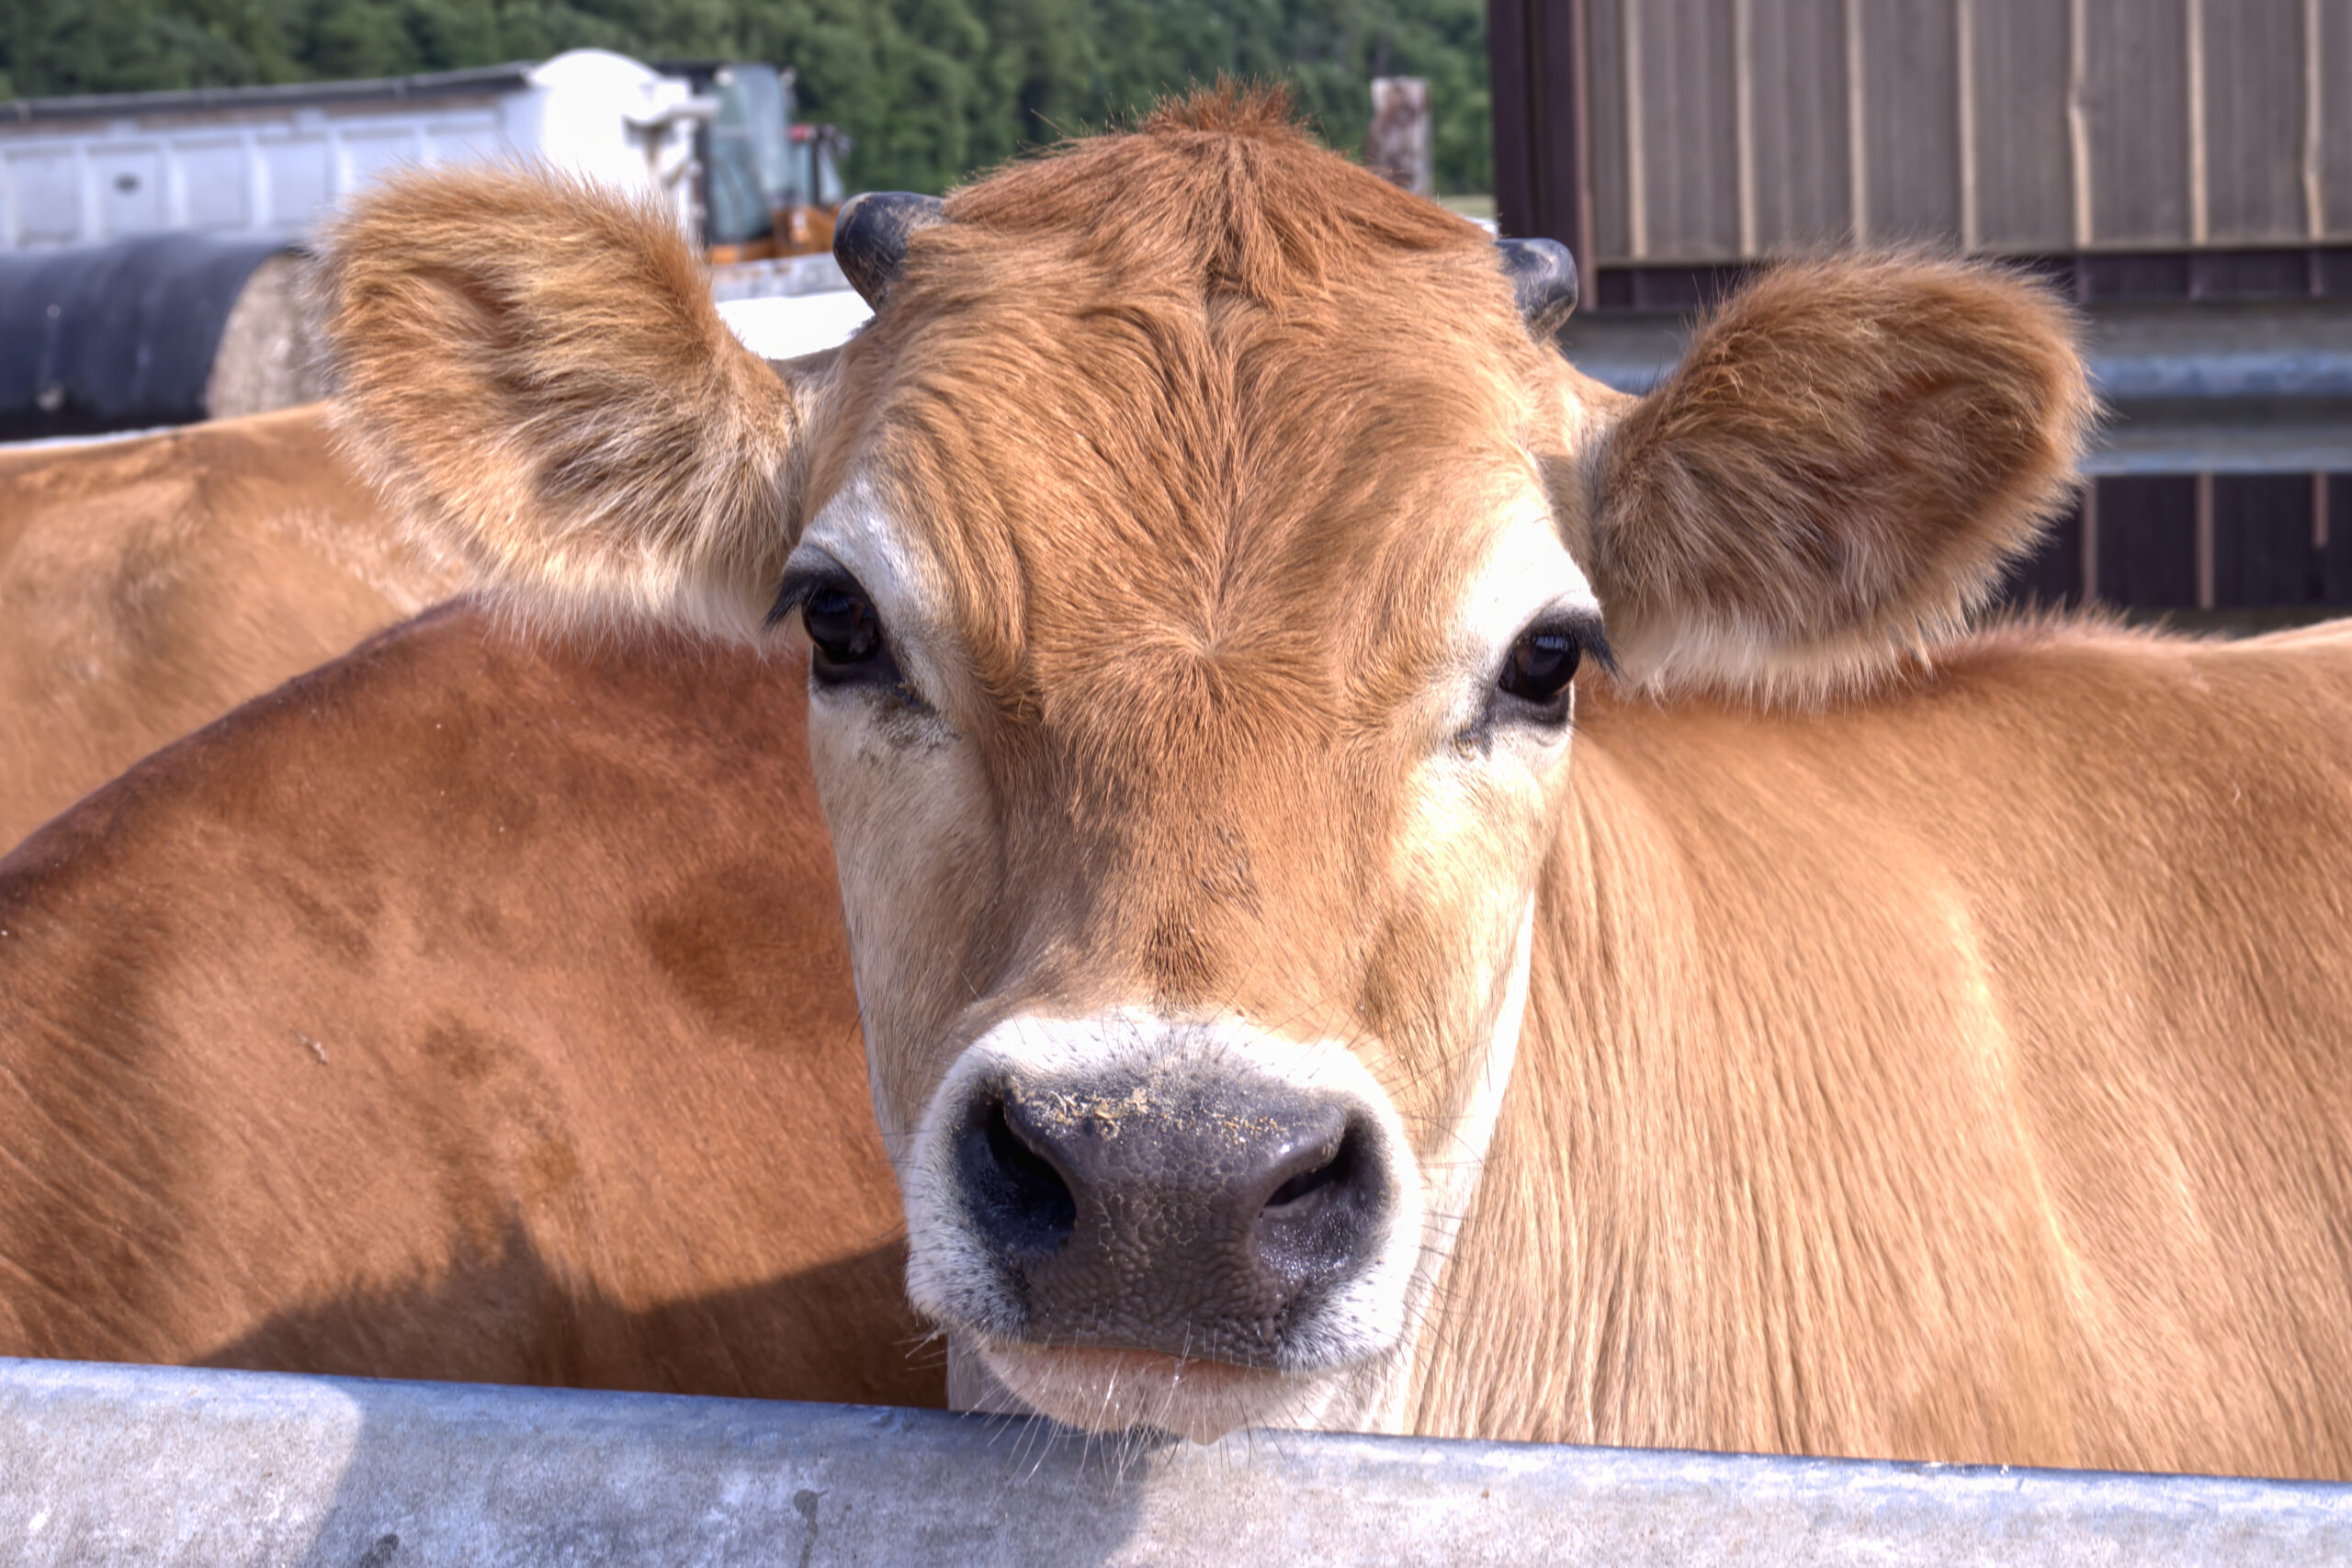 cow looking at camera with ears perked up